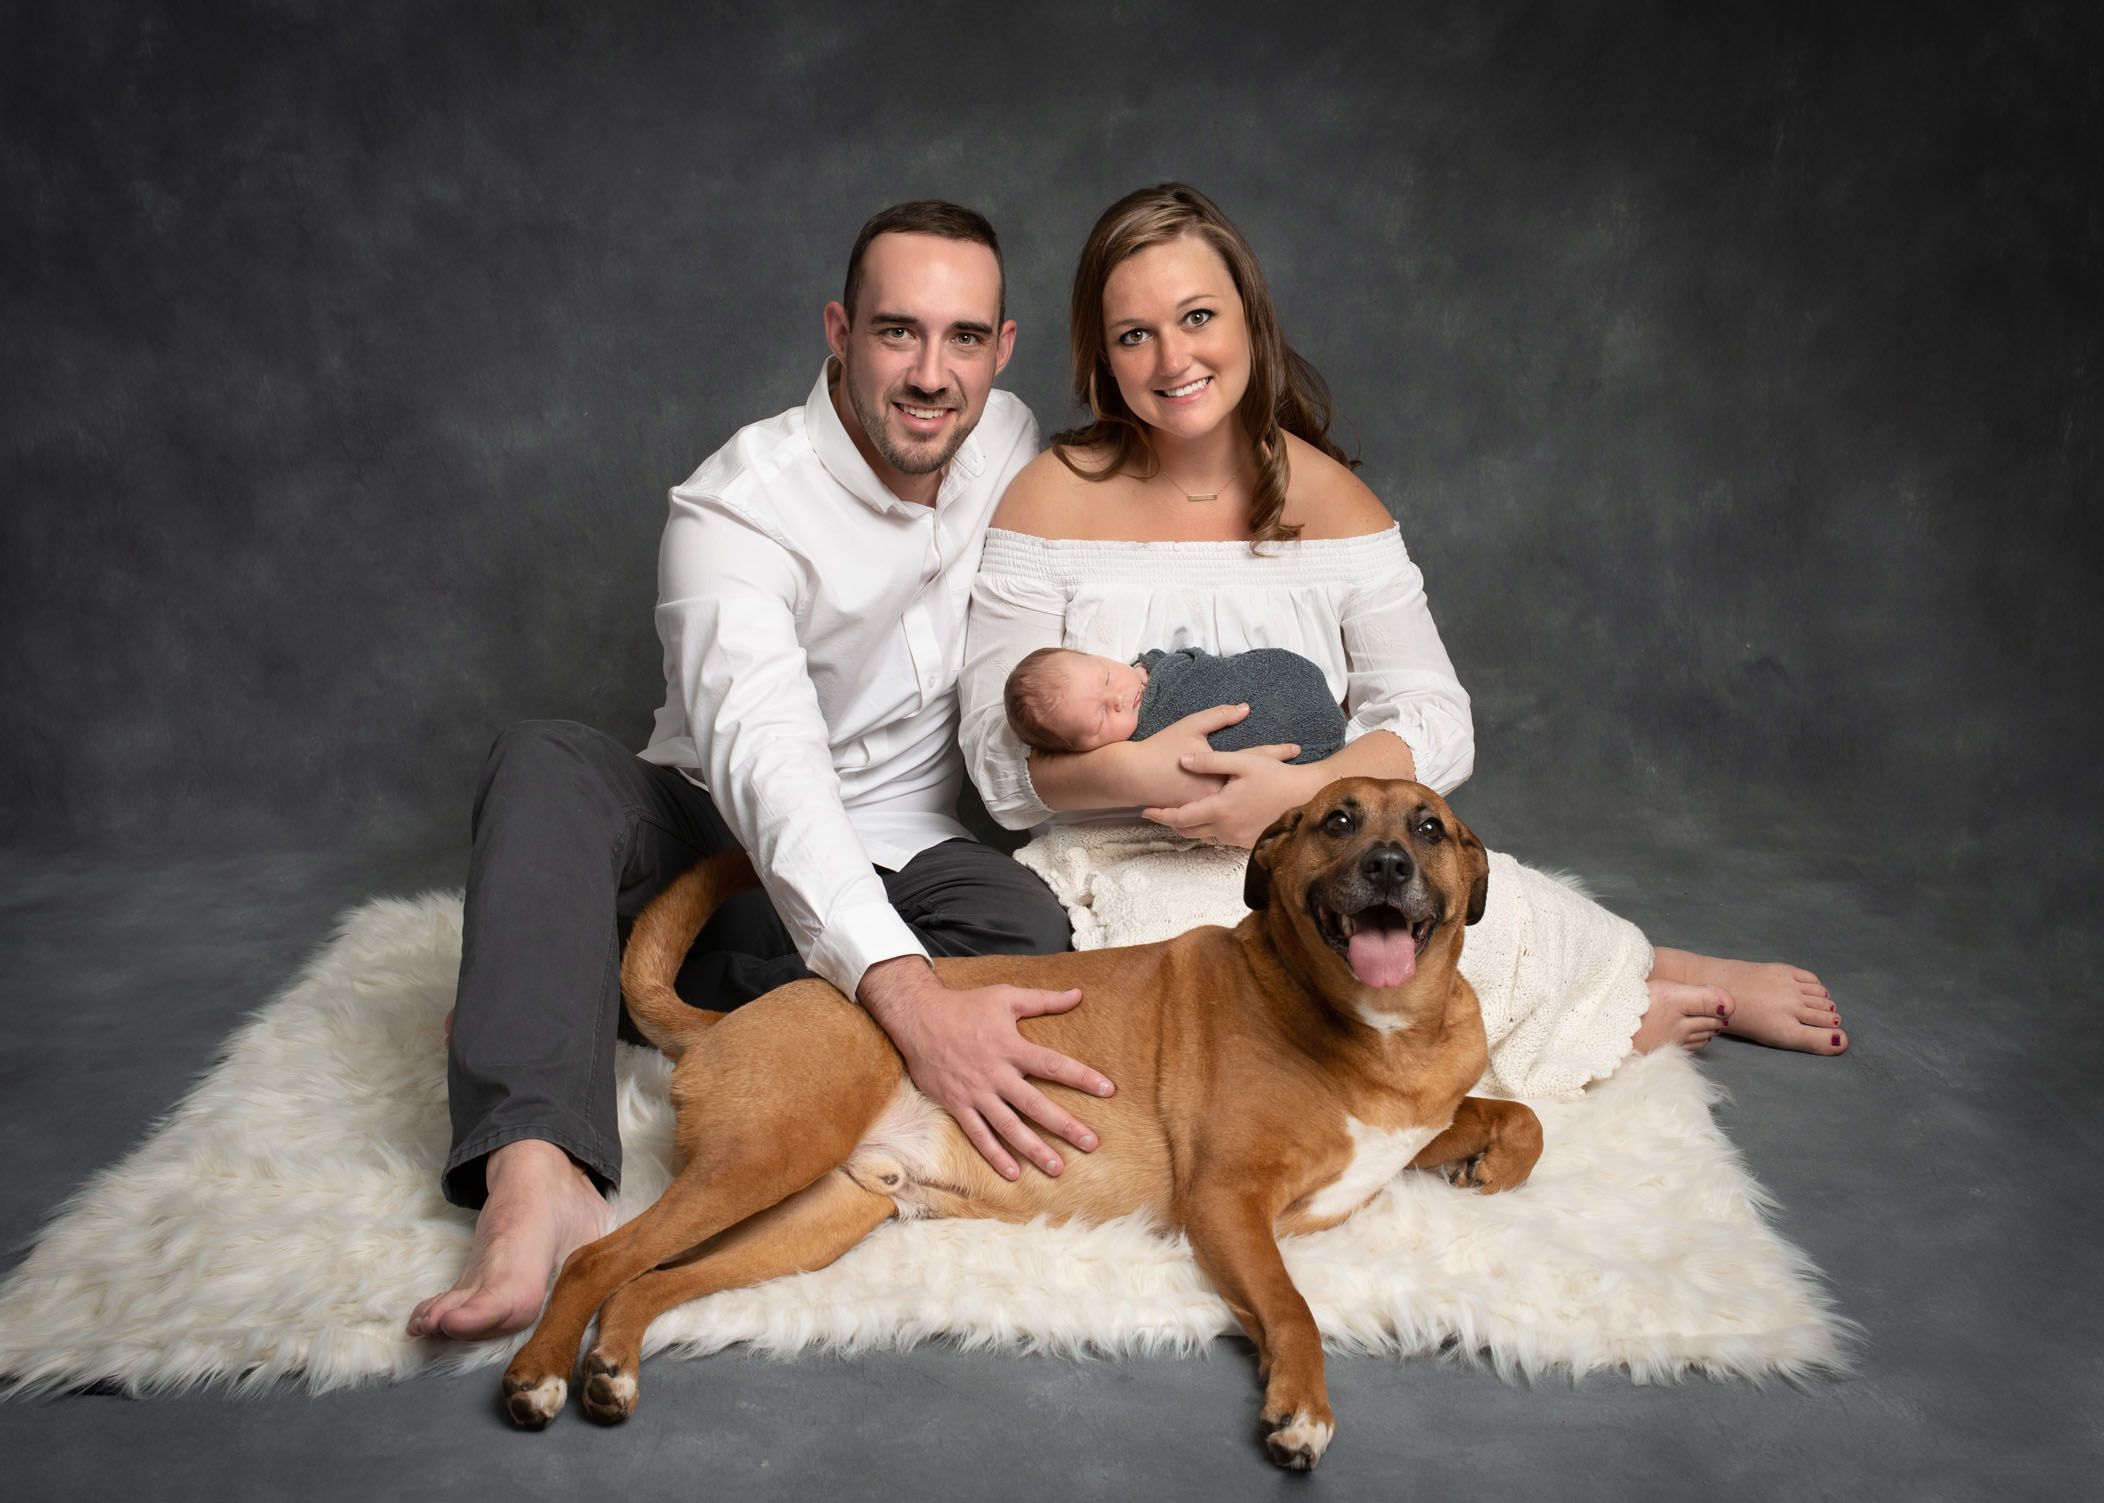 Parents holding a newborn baby with their dog on the floor in front of them